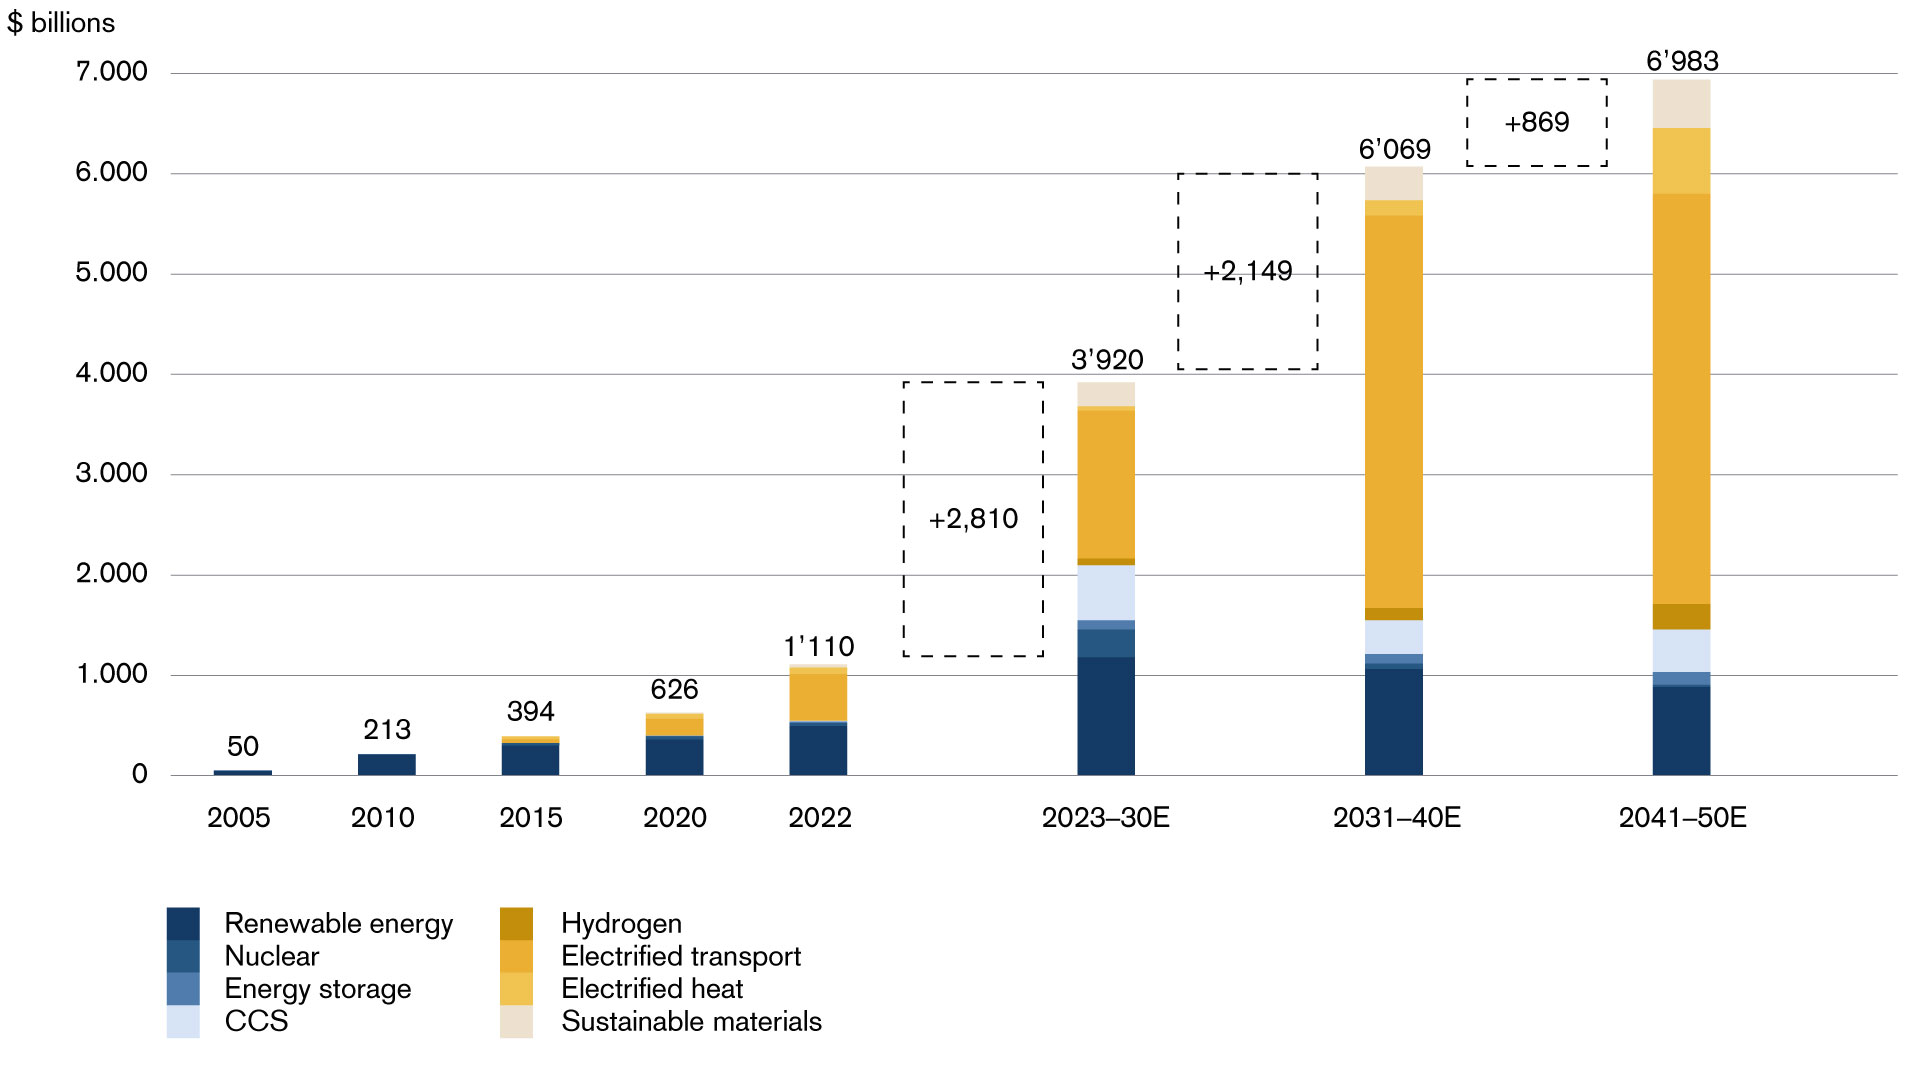 Figure 6: Global investment in energy transition by sector